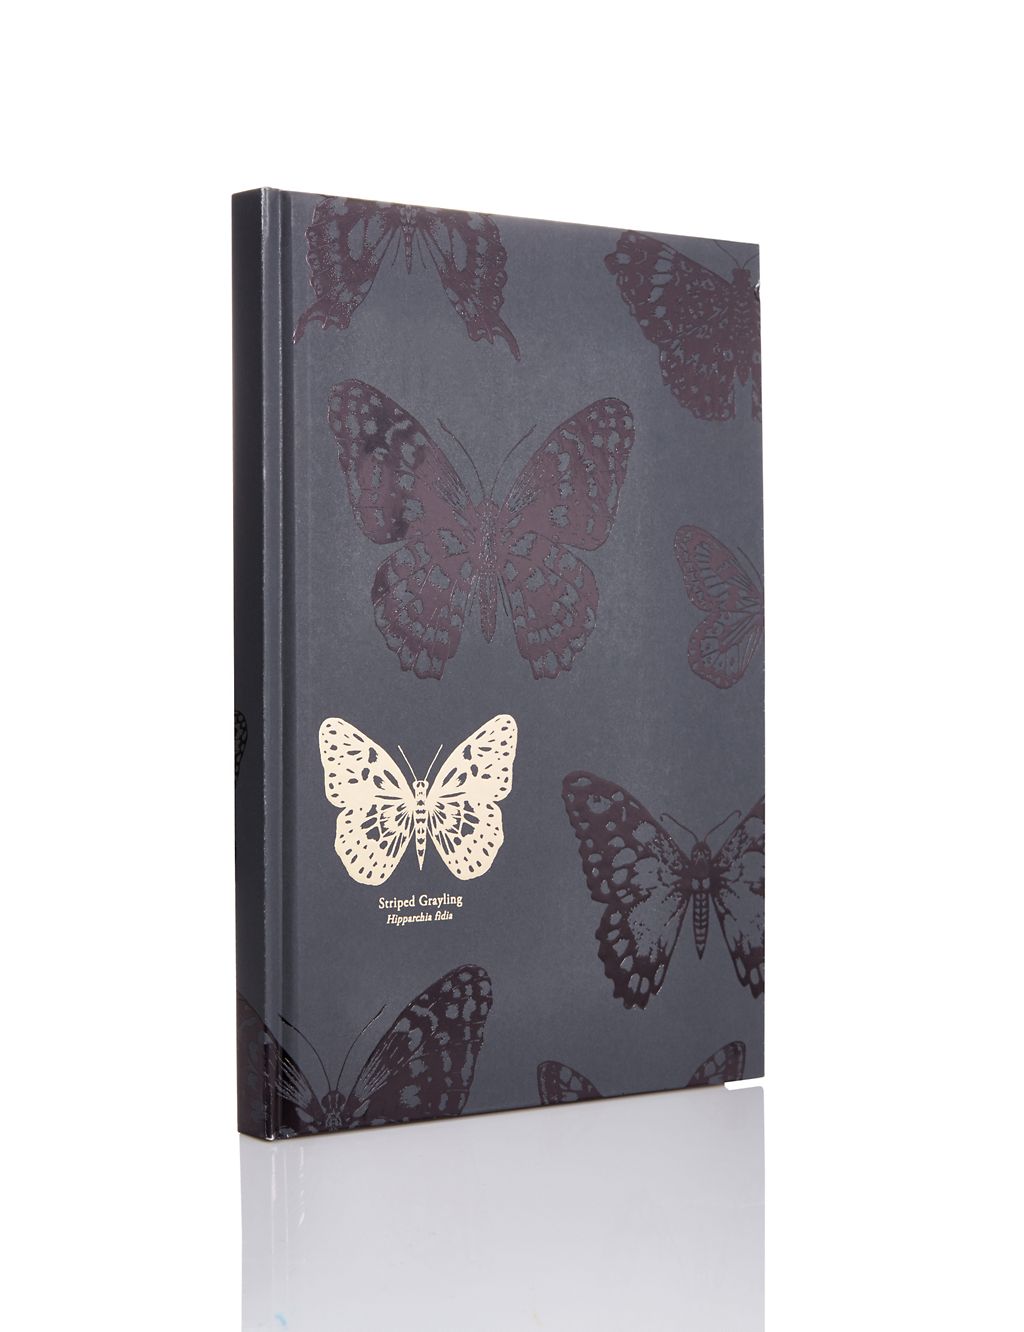 Curiosities ‘Striped Grayling’ Hard Back Notebook 1 of 3